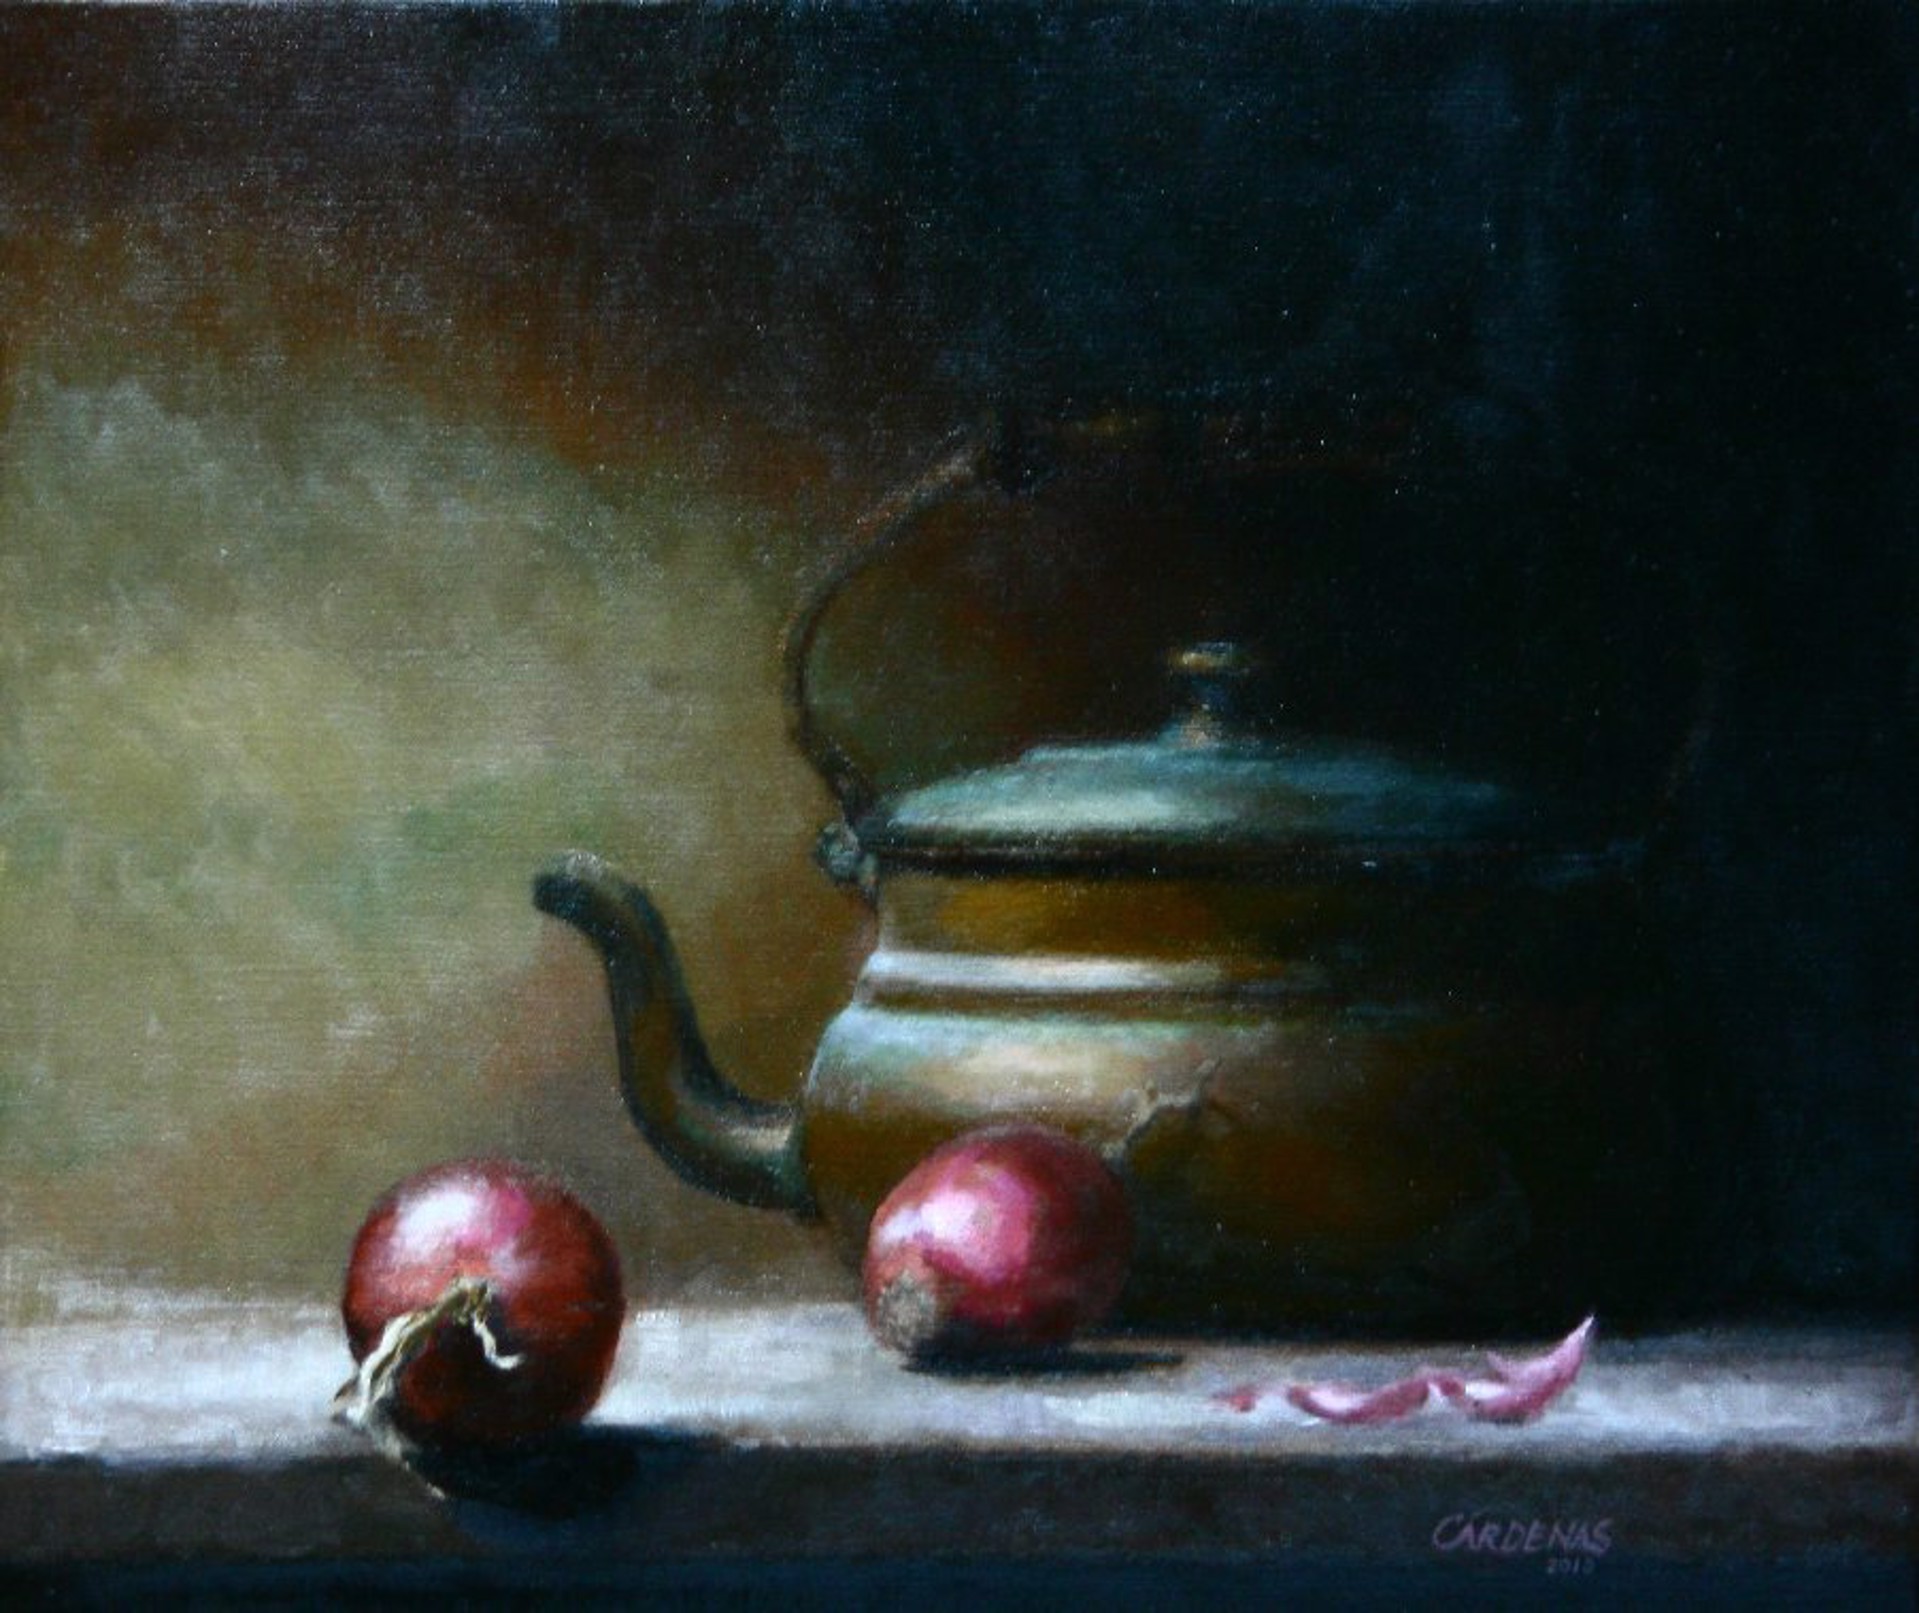 Onions and Kettle by Kathryn Cárdenas